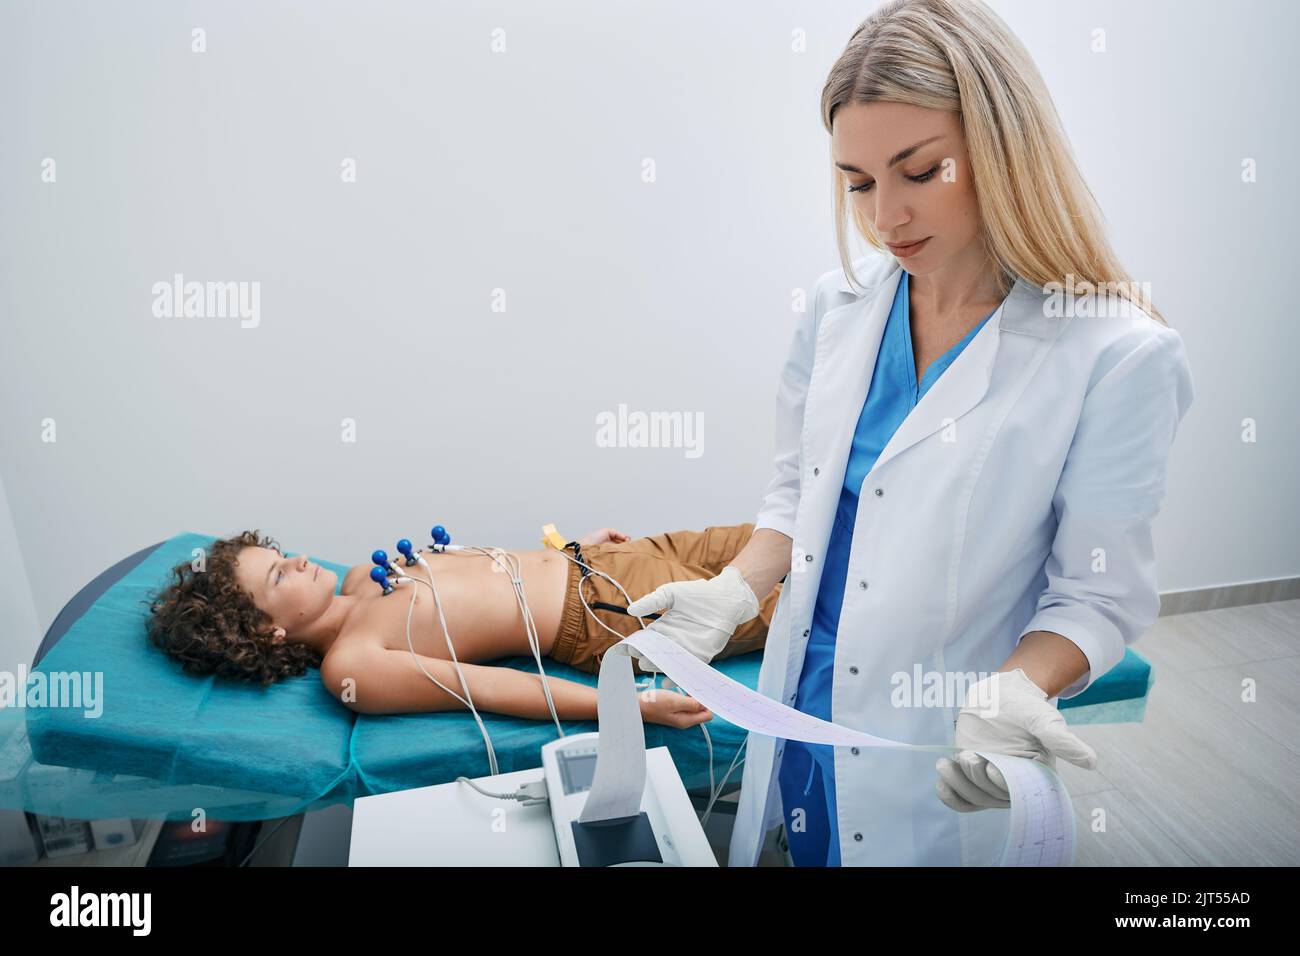 Pediatrician looking ECG printout of child patient after heart electrocardiogram procedure at medical clinic Stock Photo